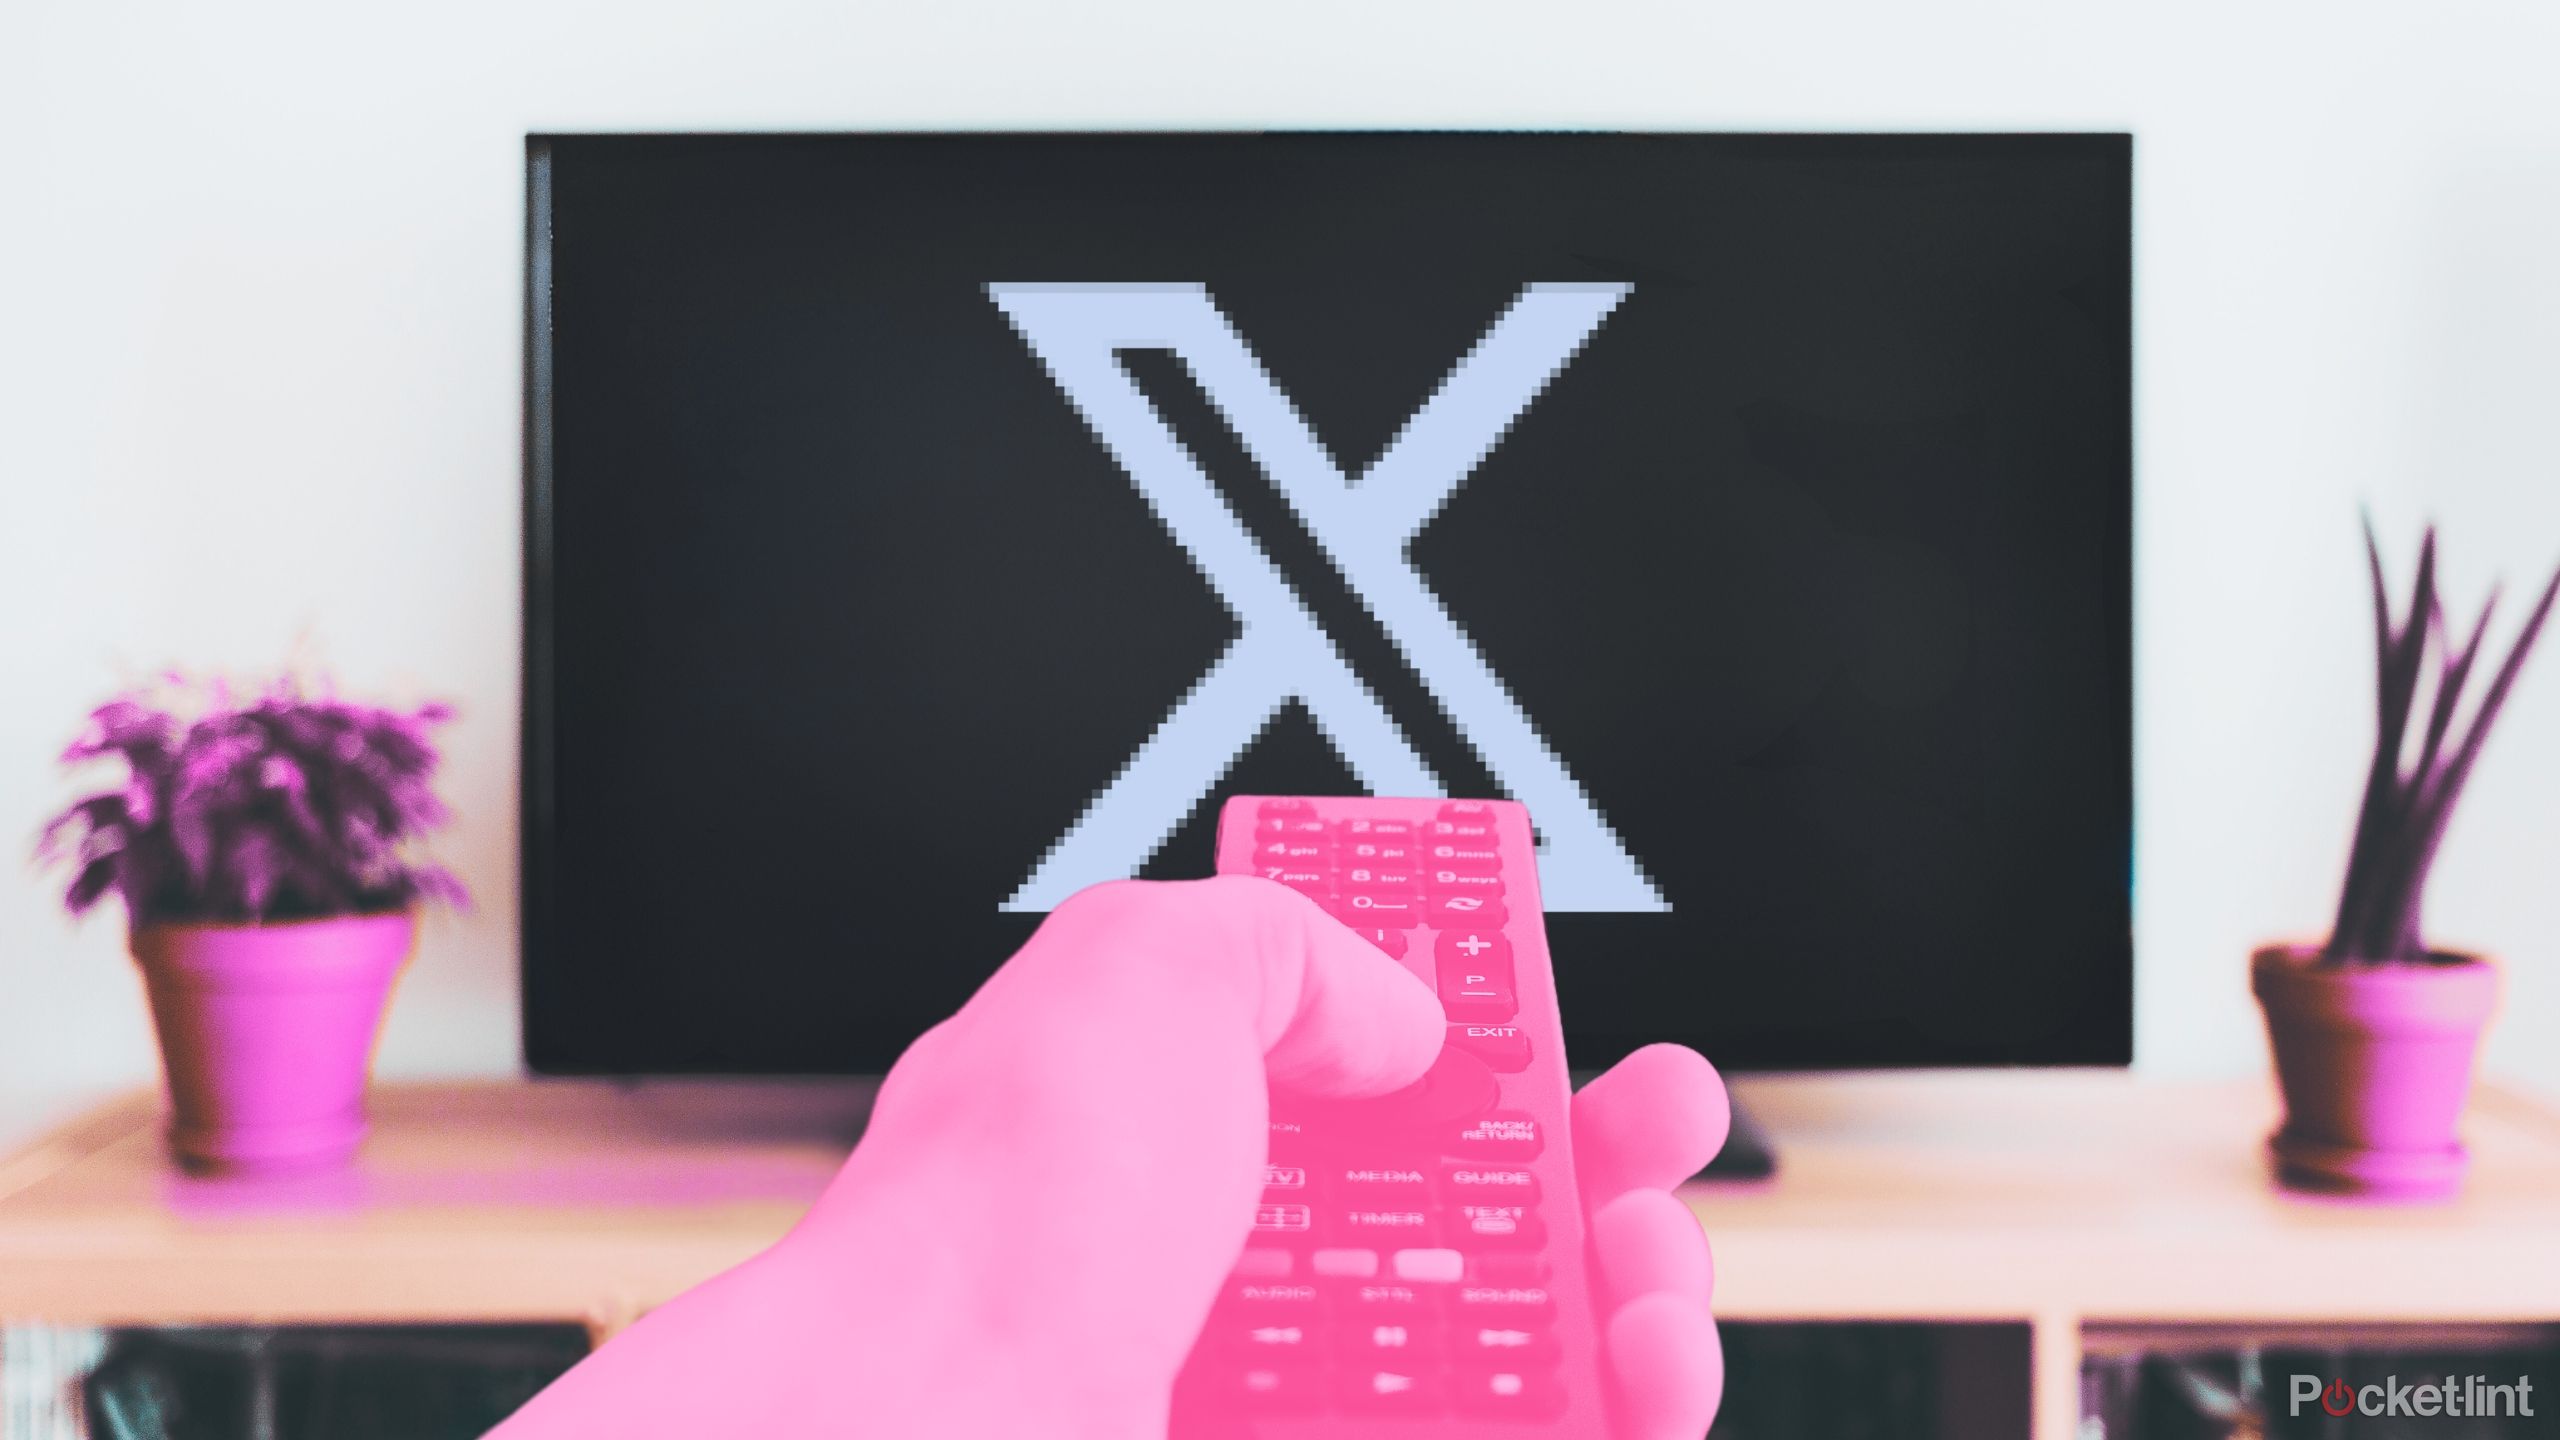 Pink remote pointing at X/Twitter logo on TV